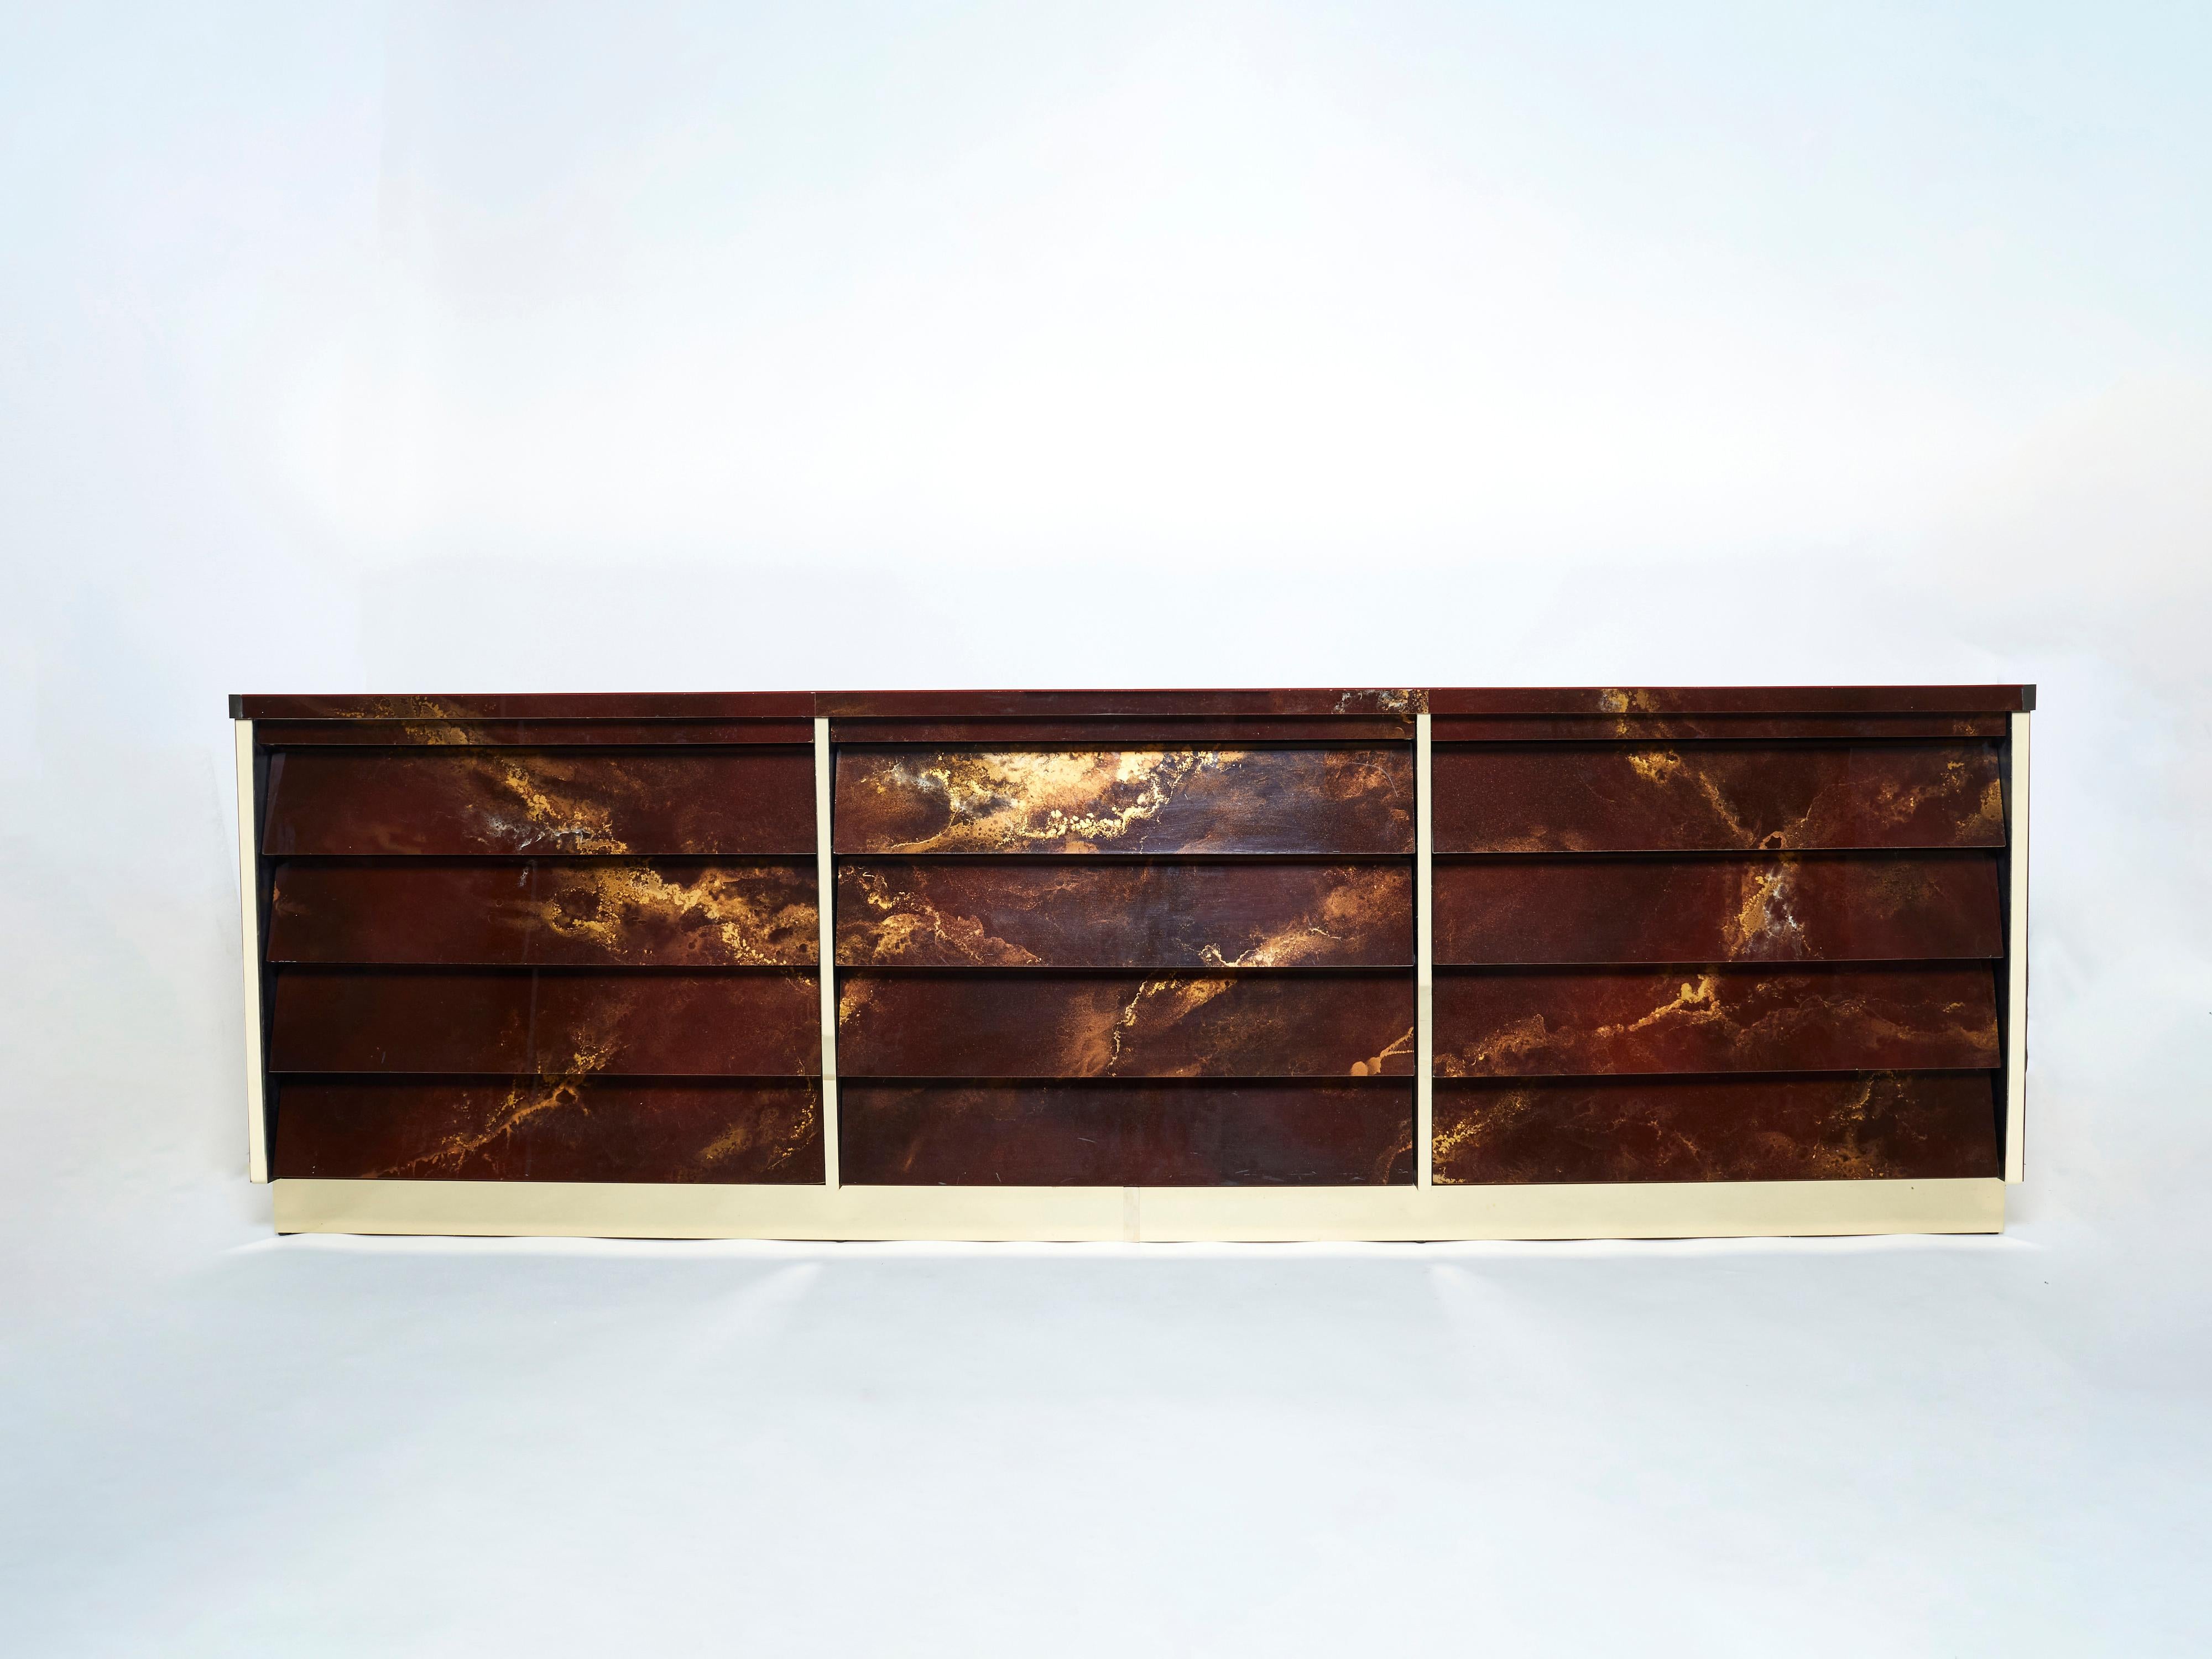 An exciting example of French design firm Maison Jansen’s commissioned pieces. This large sideboard is made from solid oak, lacquered in a rich dark brown and bronze–golden finish. The resulting effect is a beautiful mottling of color around the